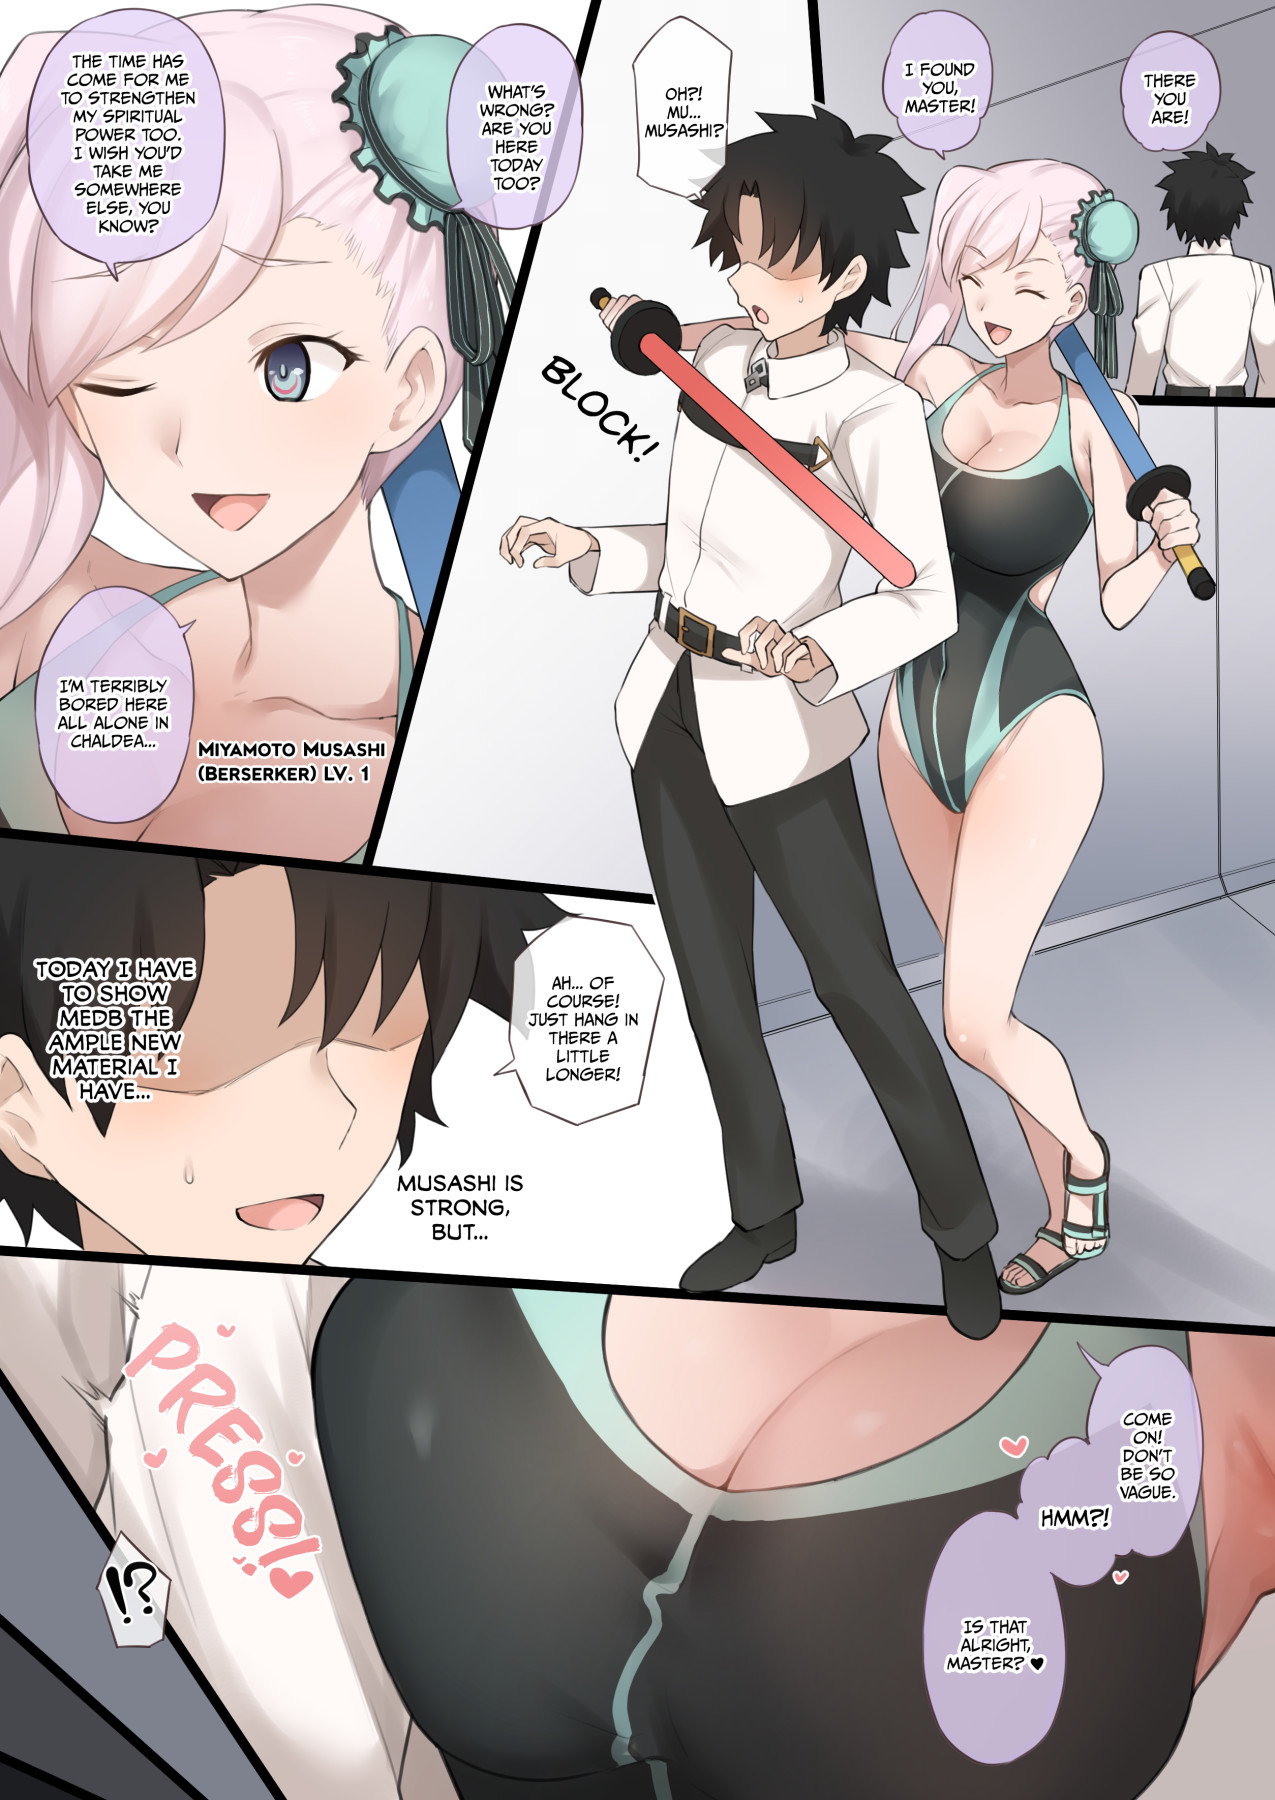 Hentai Manga Comic-A Story About Musashi In a Swimsuit Getting NTR Fucked By Big Black Cocks-Read-1